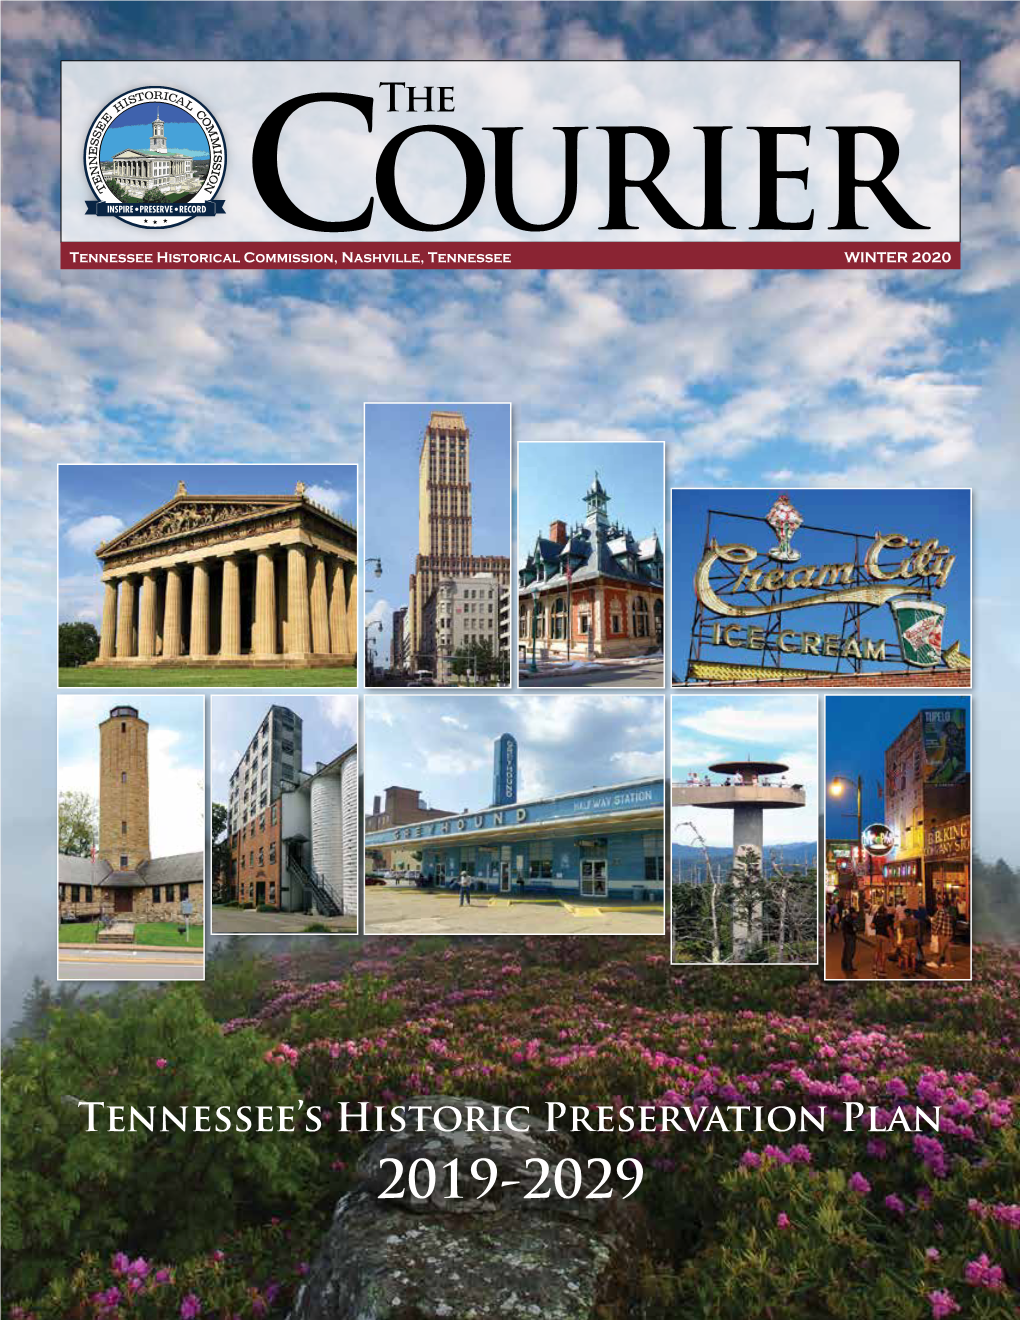 The Tennessee's Historic Preservation Plan